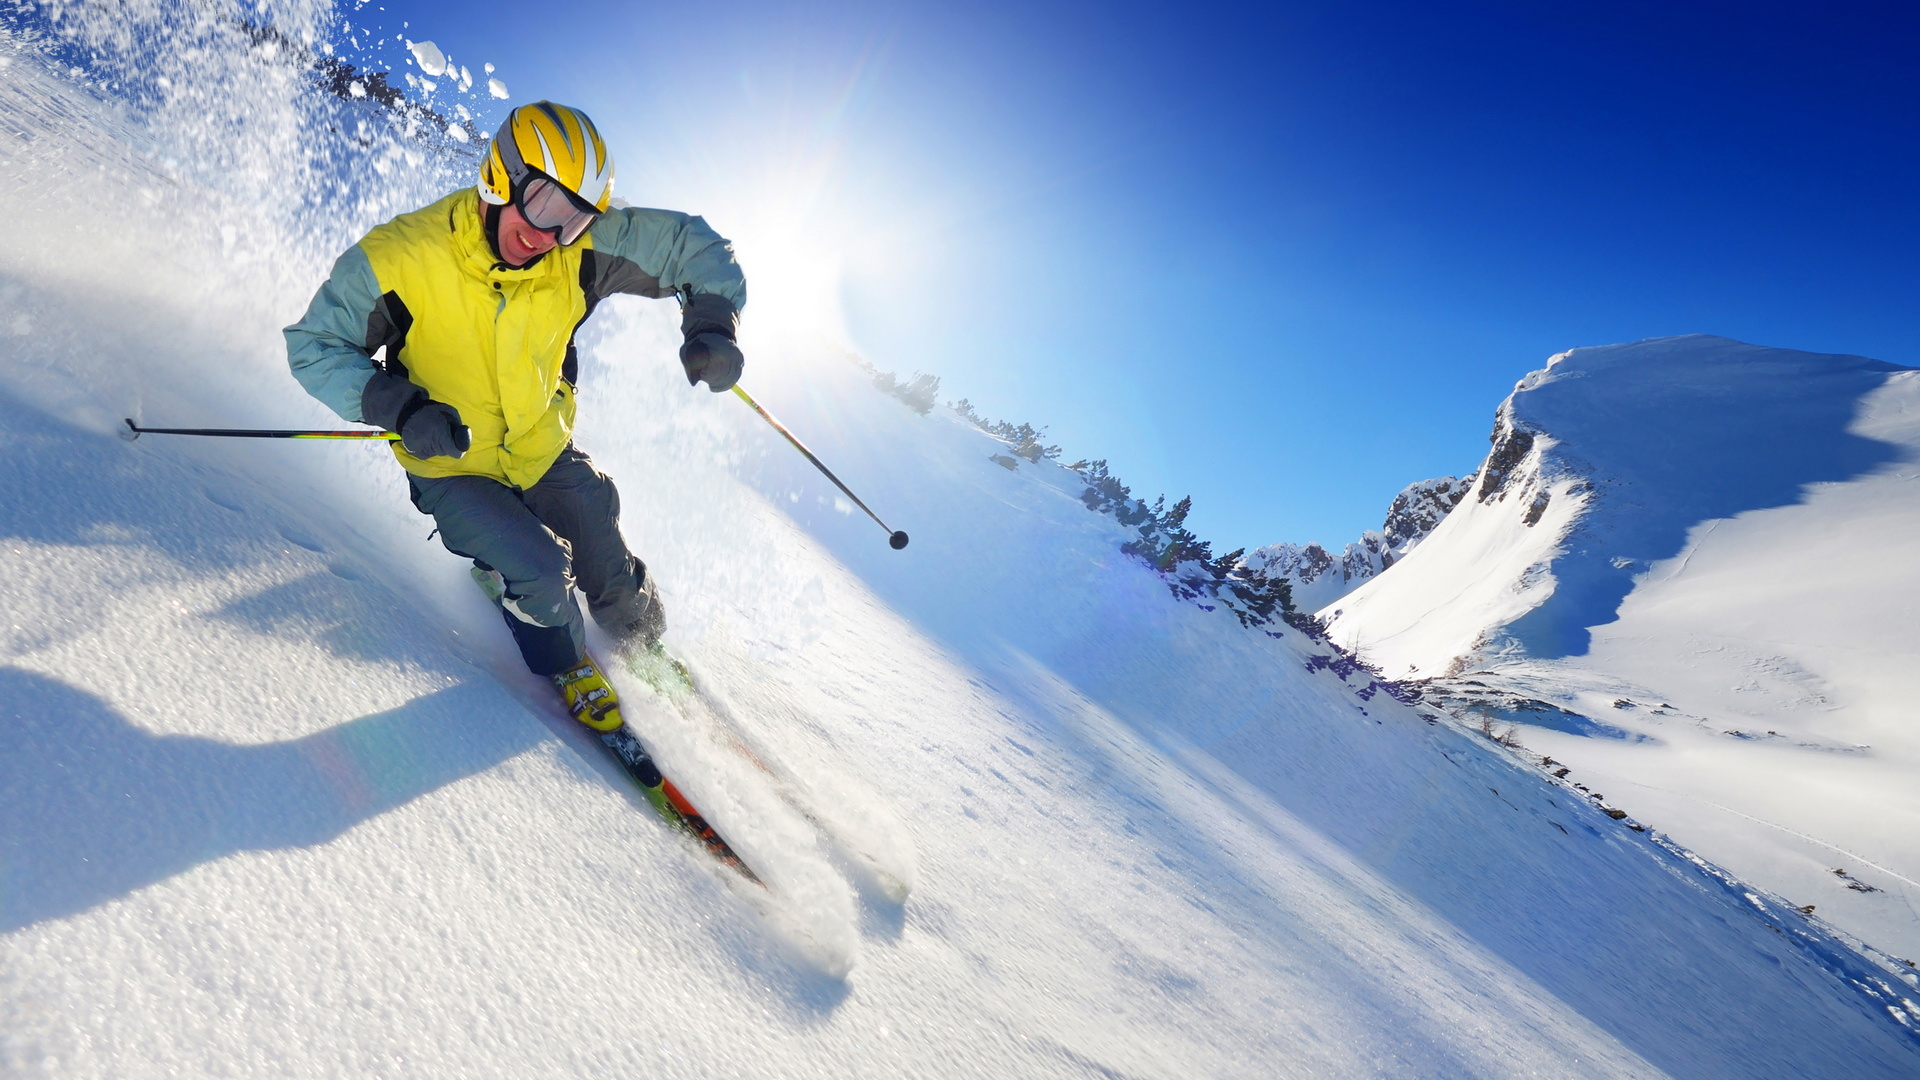 Staying warm when skiing - myth or reality?